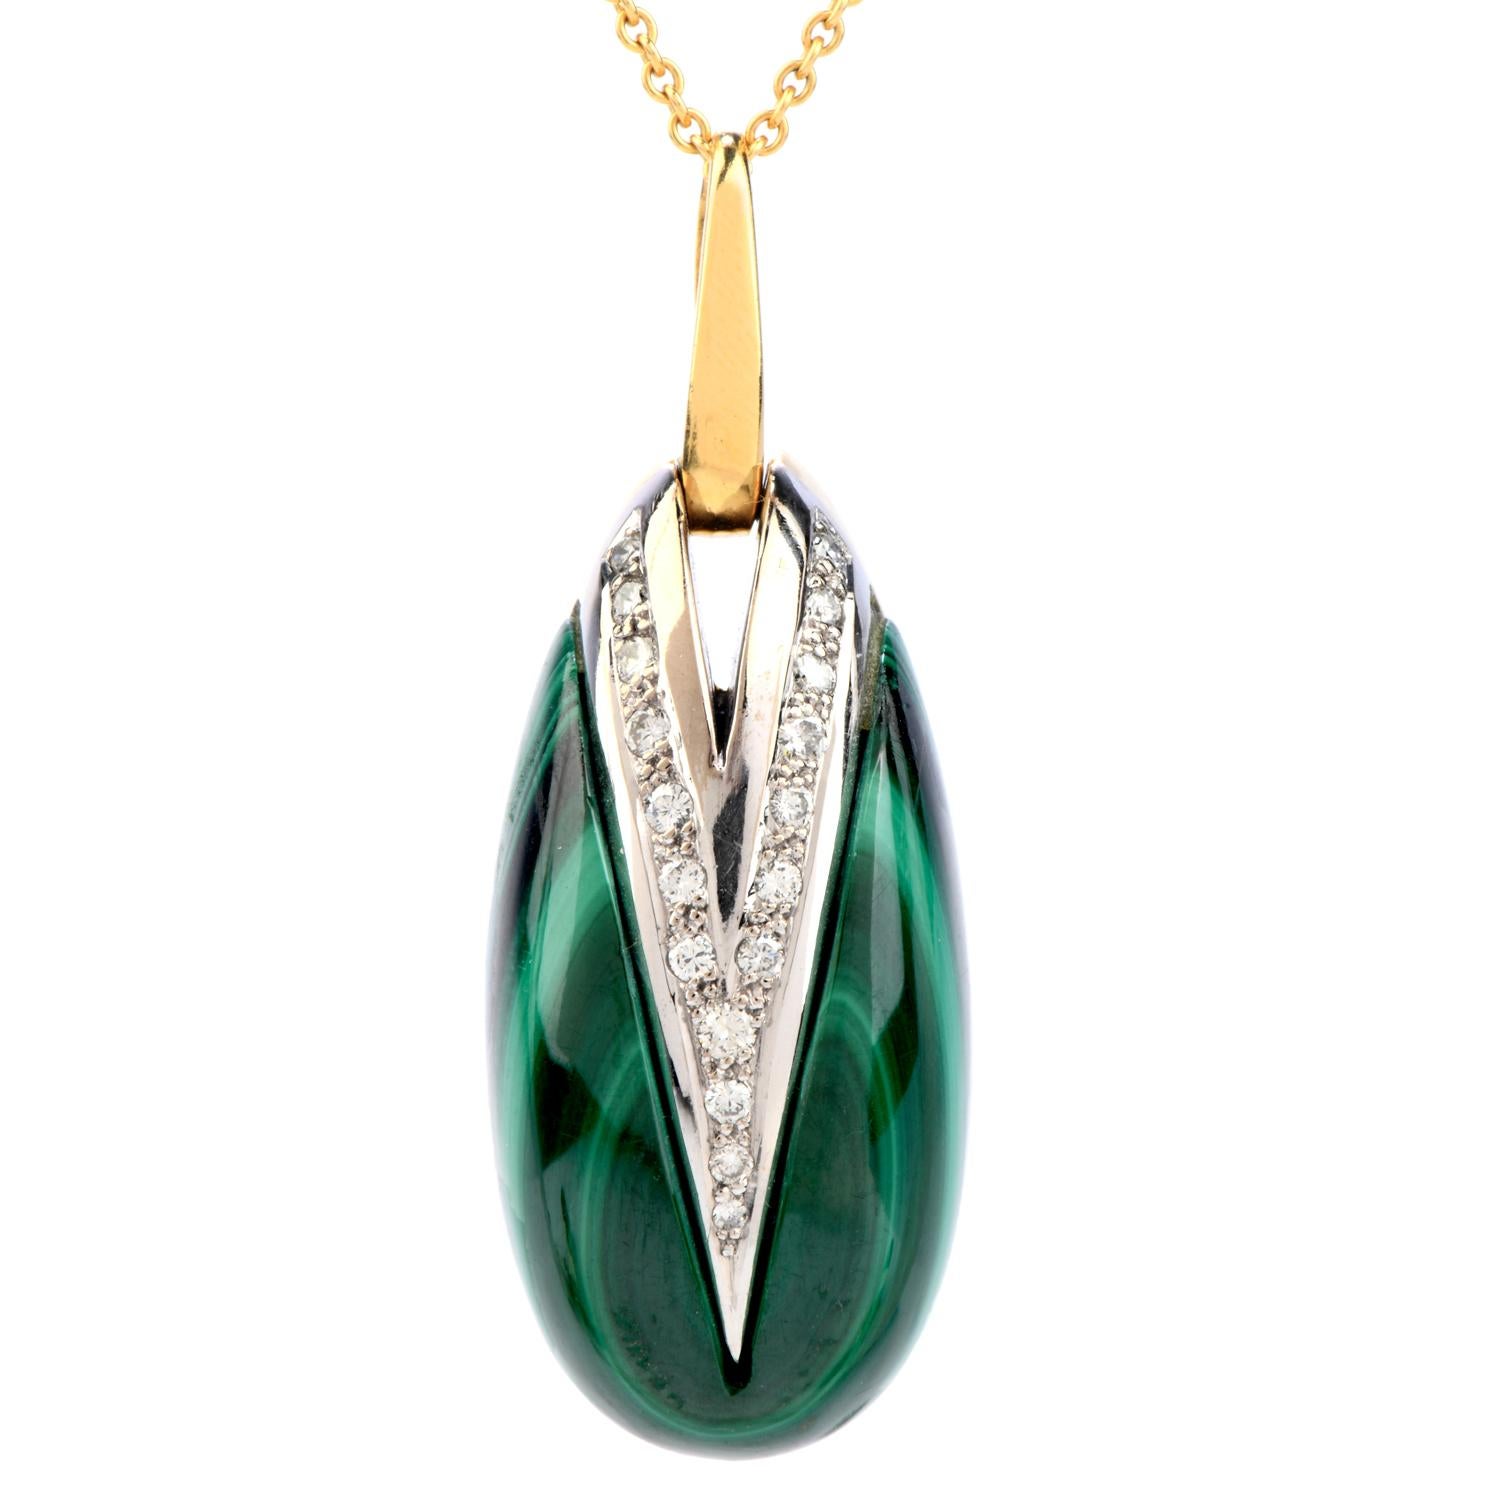 This Vintage 1970's pendant crafted with solid 18-karat yellow gold, weighing 34.2 grams and measuring 52mm long (including bale) x 19mm wide (max).

Composed of a rounded oval green genuine malachite stone l framed in  detailed yellow gold.

Set